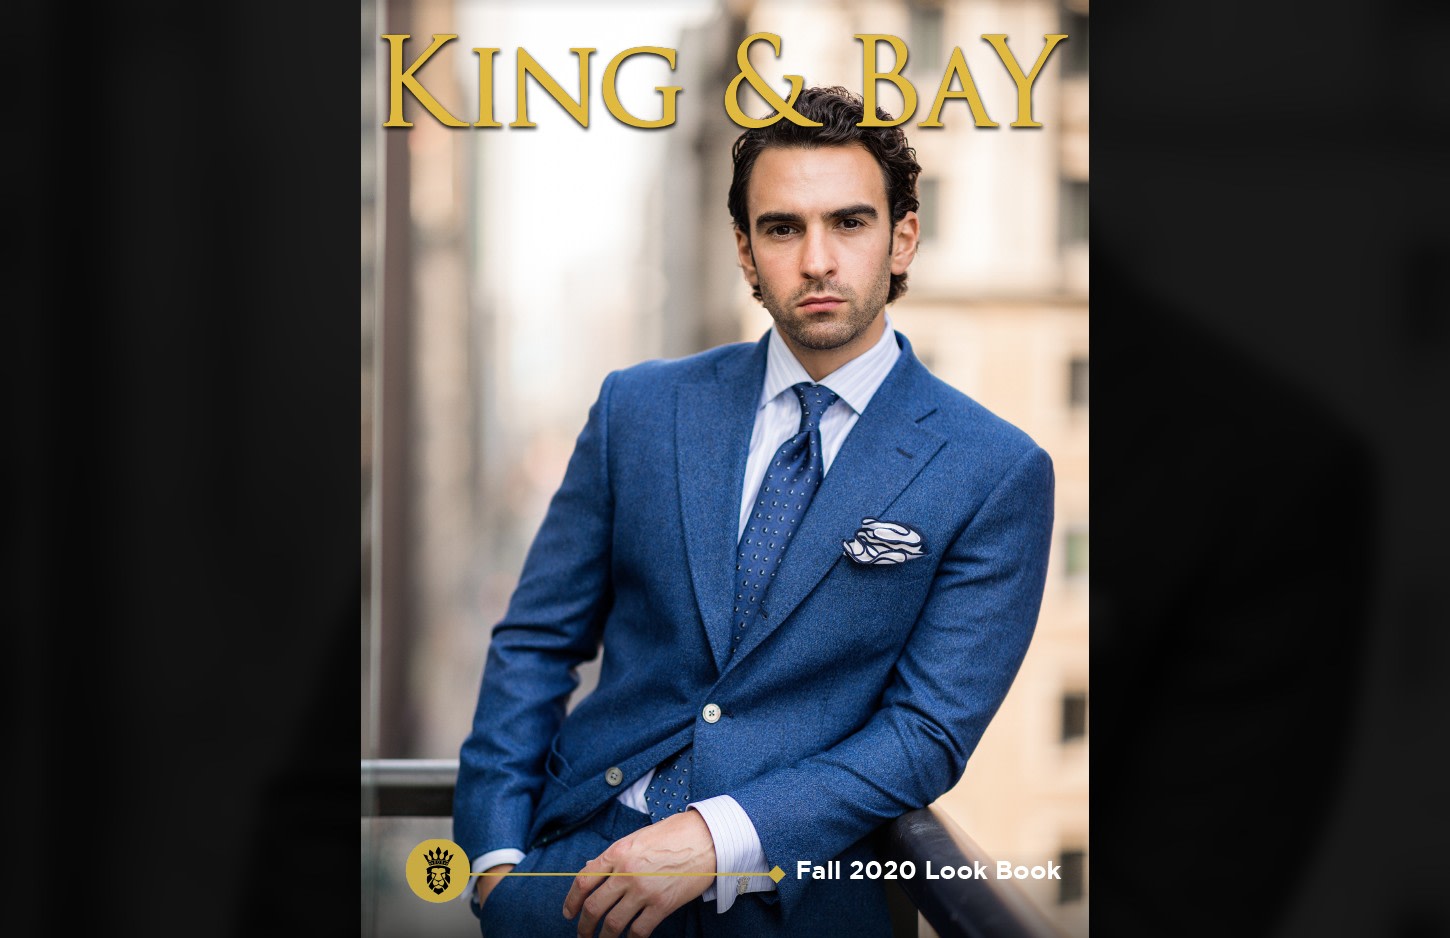 Fall 2020 Look Book from King & Bay